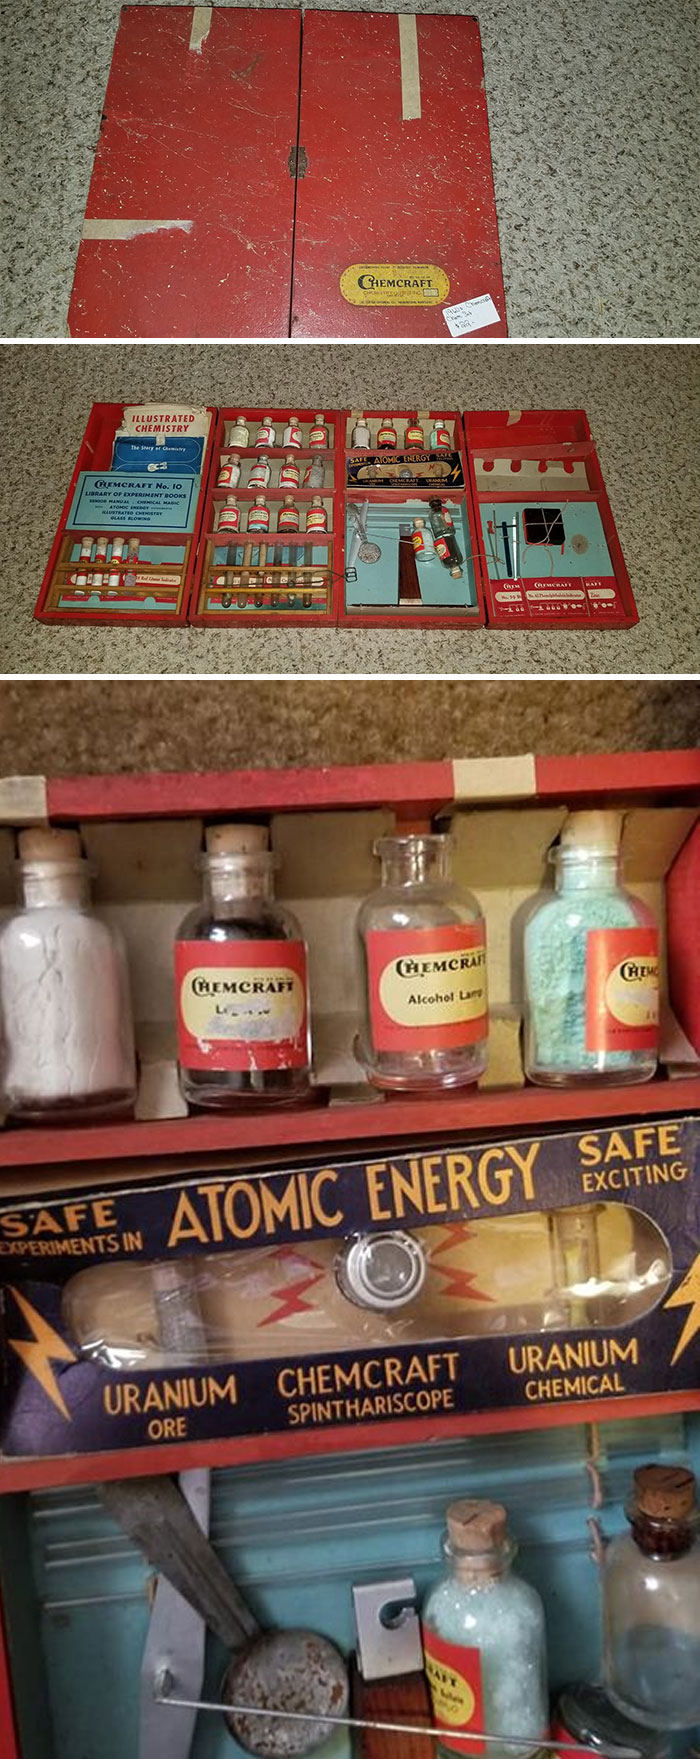 I Found This Kids Chemcraft Chemistry Set At A Flea Market In Nashville, Tennessee. People Would Lose Their Minds If Something Like This Was Released Today For Kids To Play With